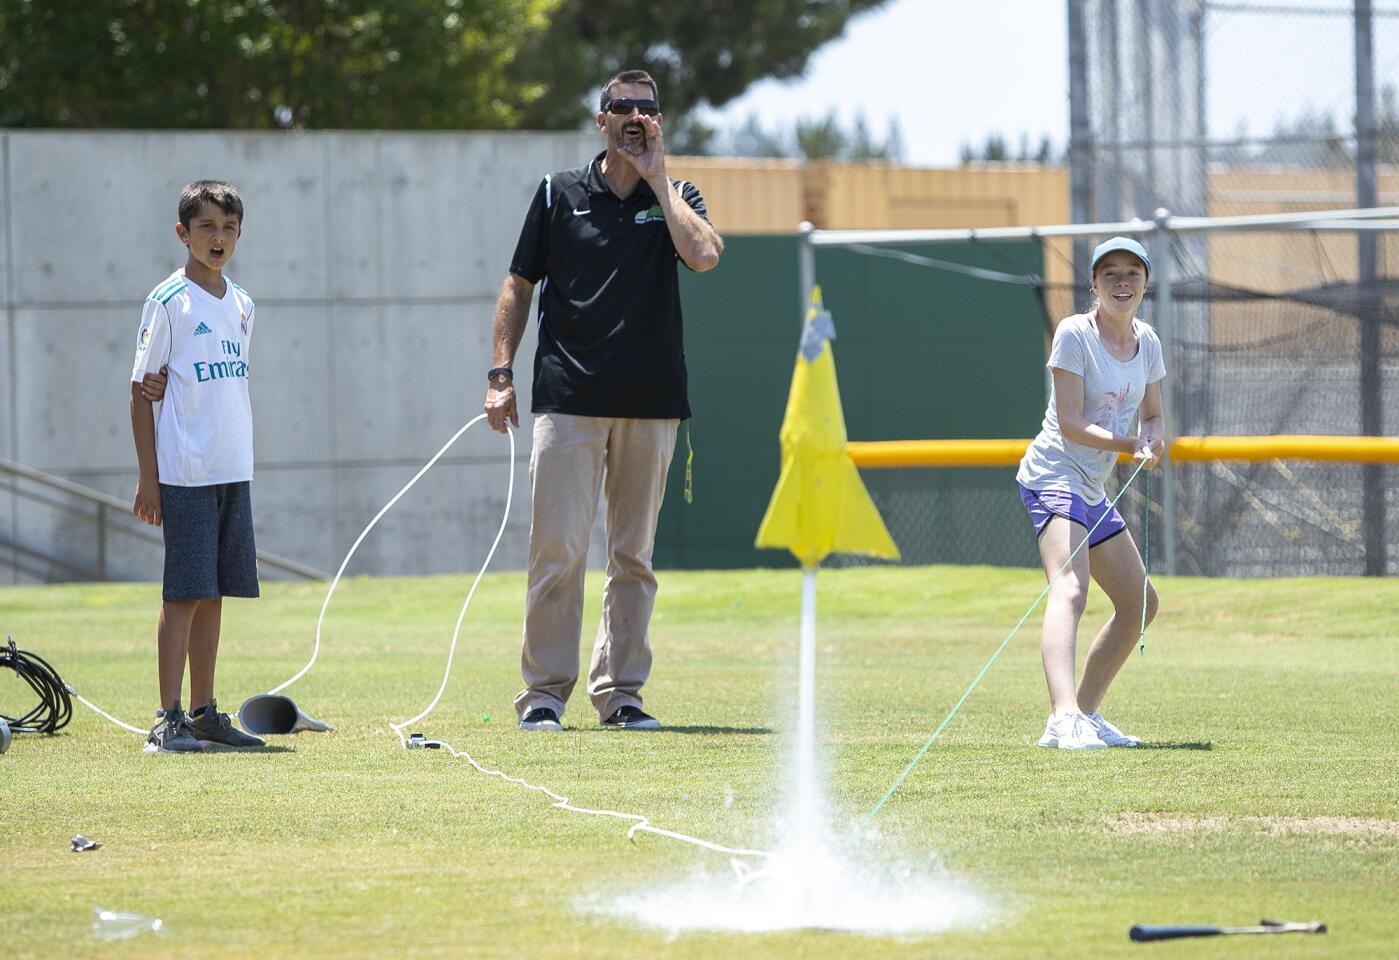 Sage Hill School chemistry teacher Kerry Langdale counts down as Kristina Vitale, 14, launches her plastic bottle rocket during Camp Sage, Sage Hill's summer day camp for middle-schoolers.